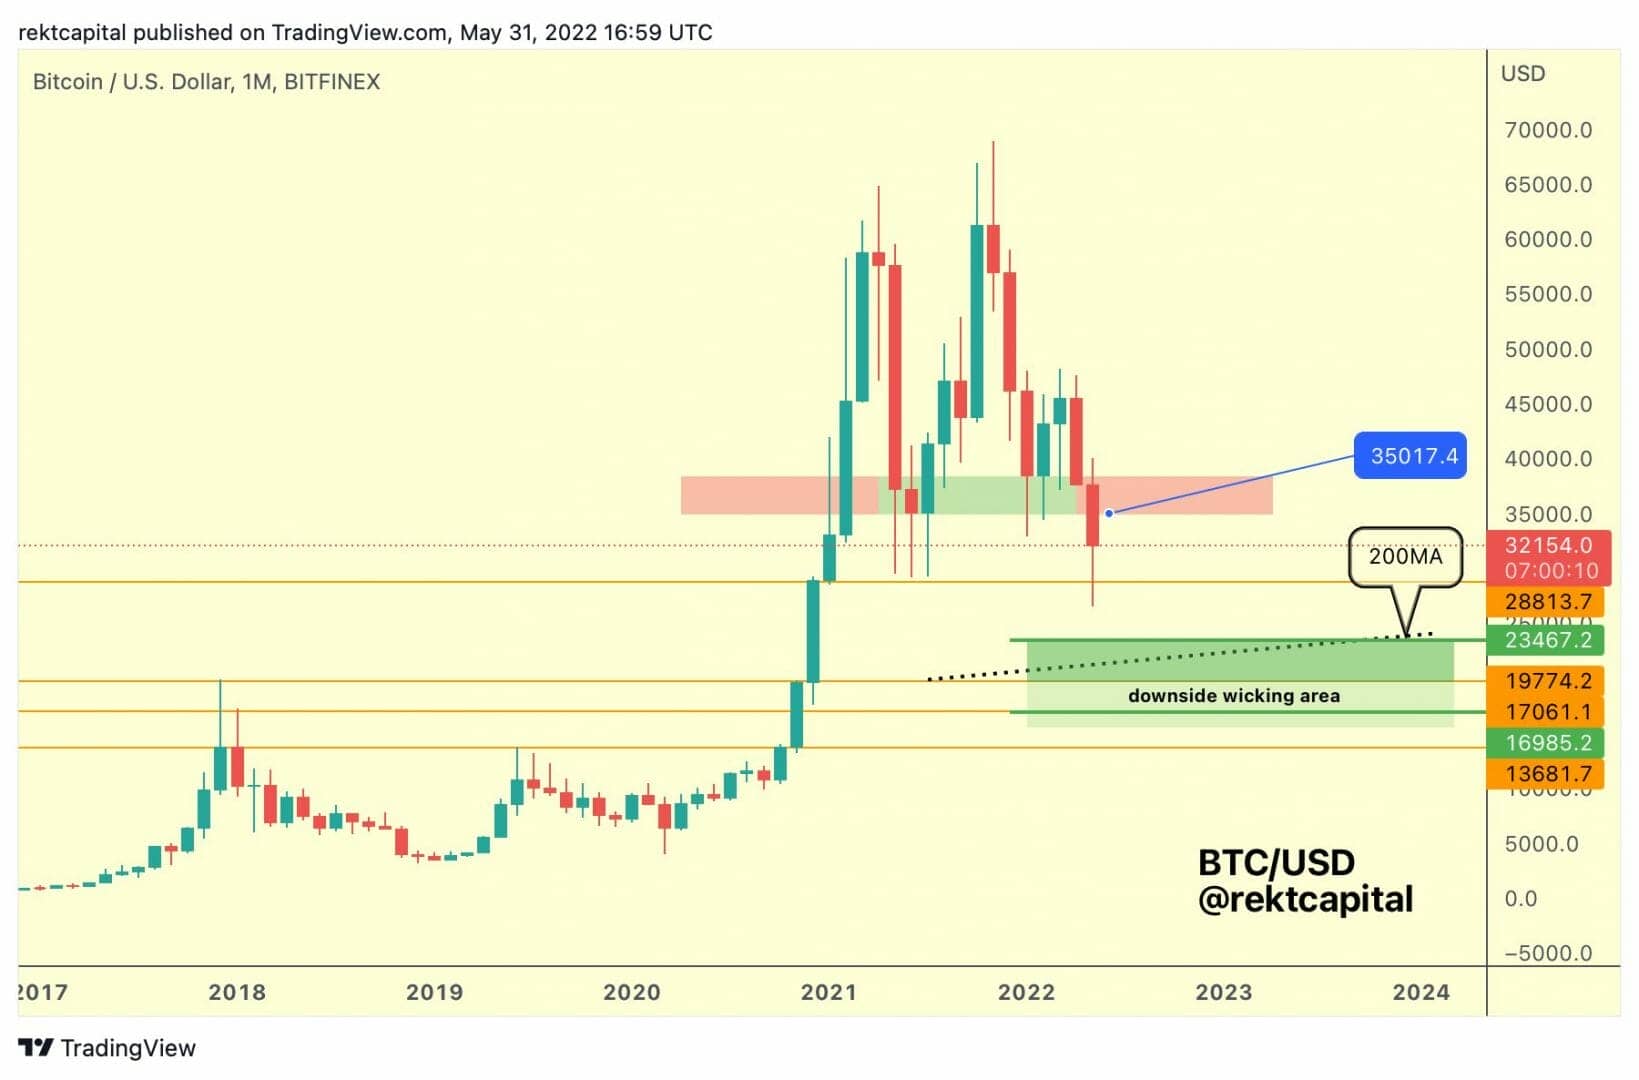 $35,000 as the ideal monthly closing level